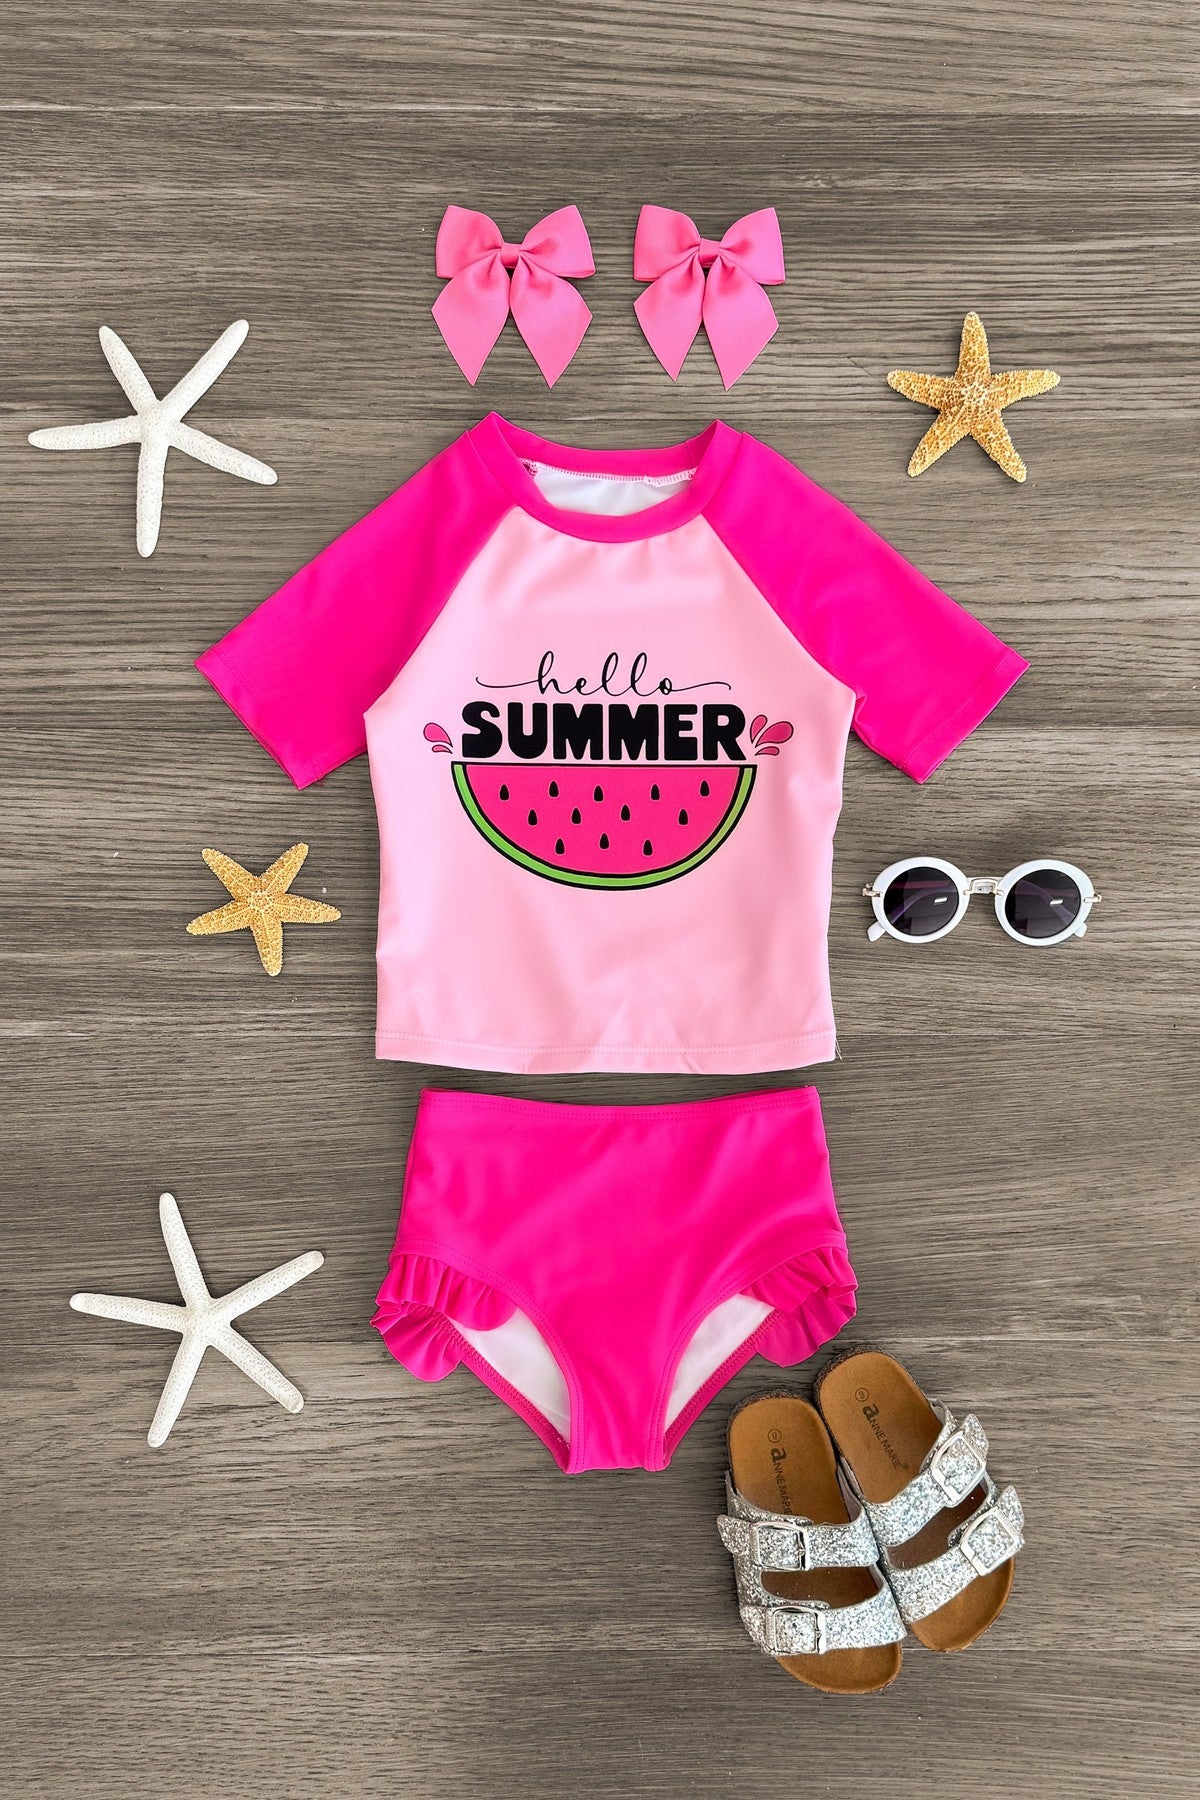 "Hello Summer" Pink Rash Guard Swimsuit - Sparkle in Pink